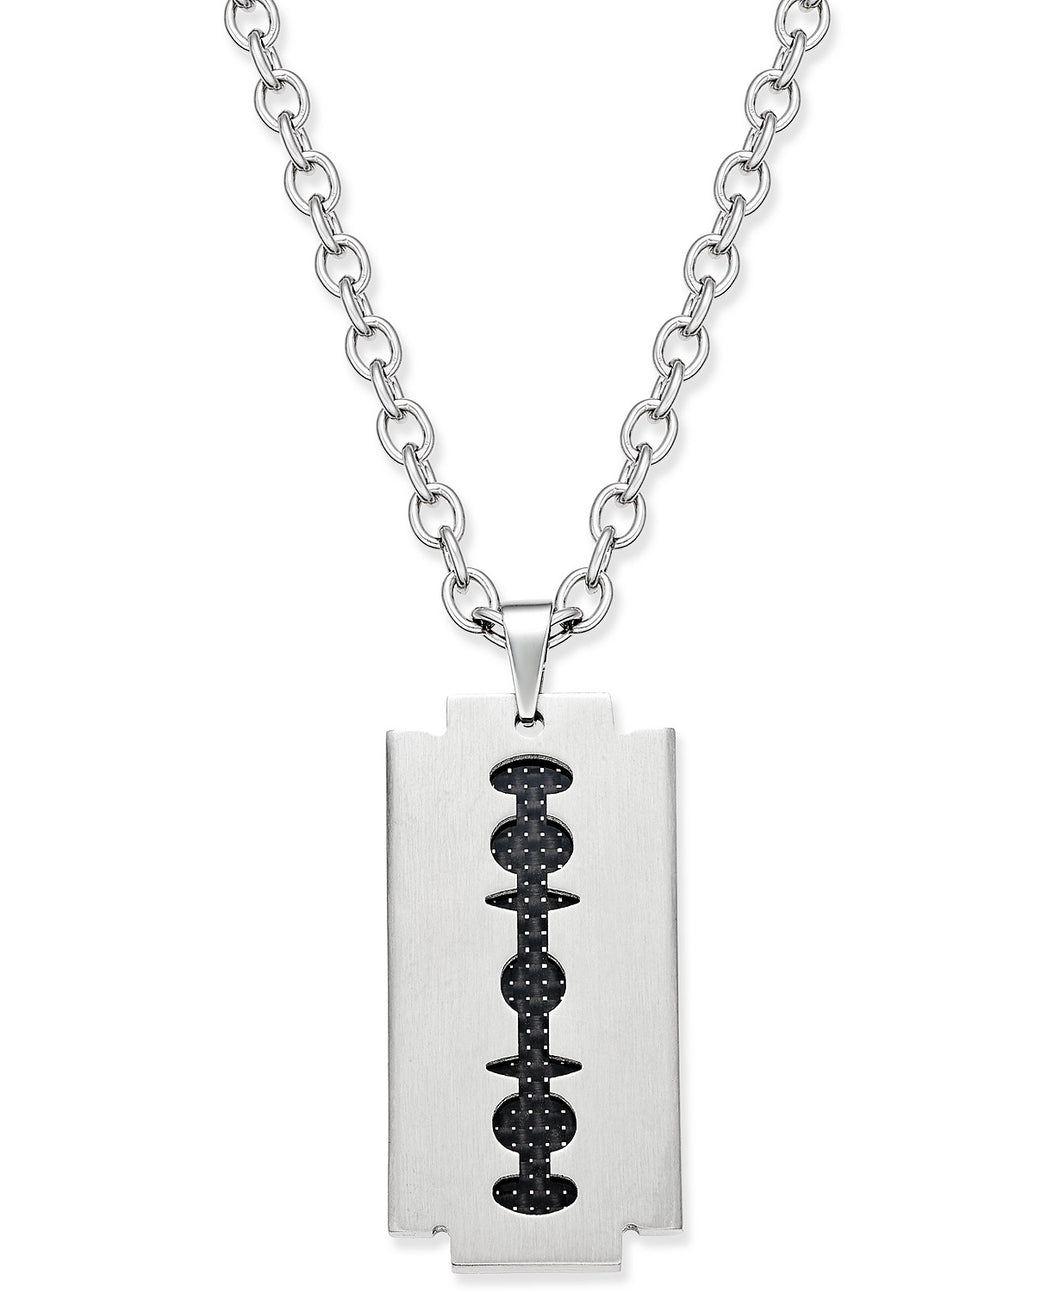 Men's Two-Tone Stainless Steel Blade Pendant Necklace